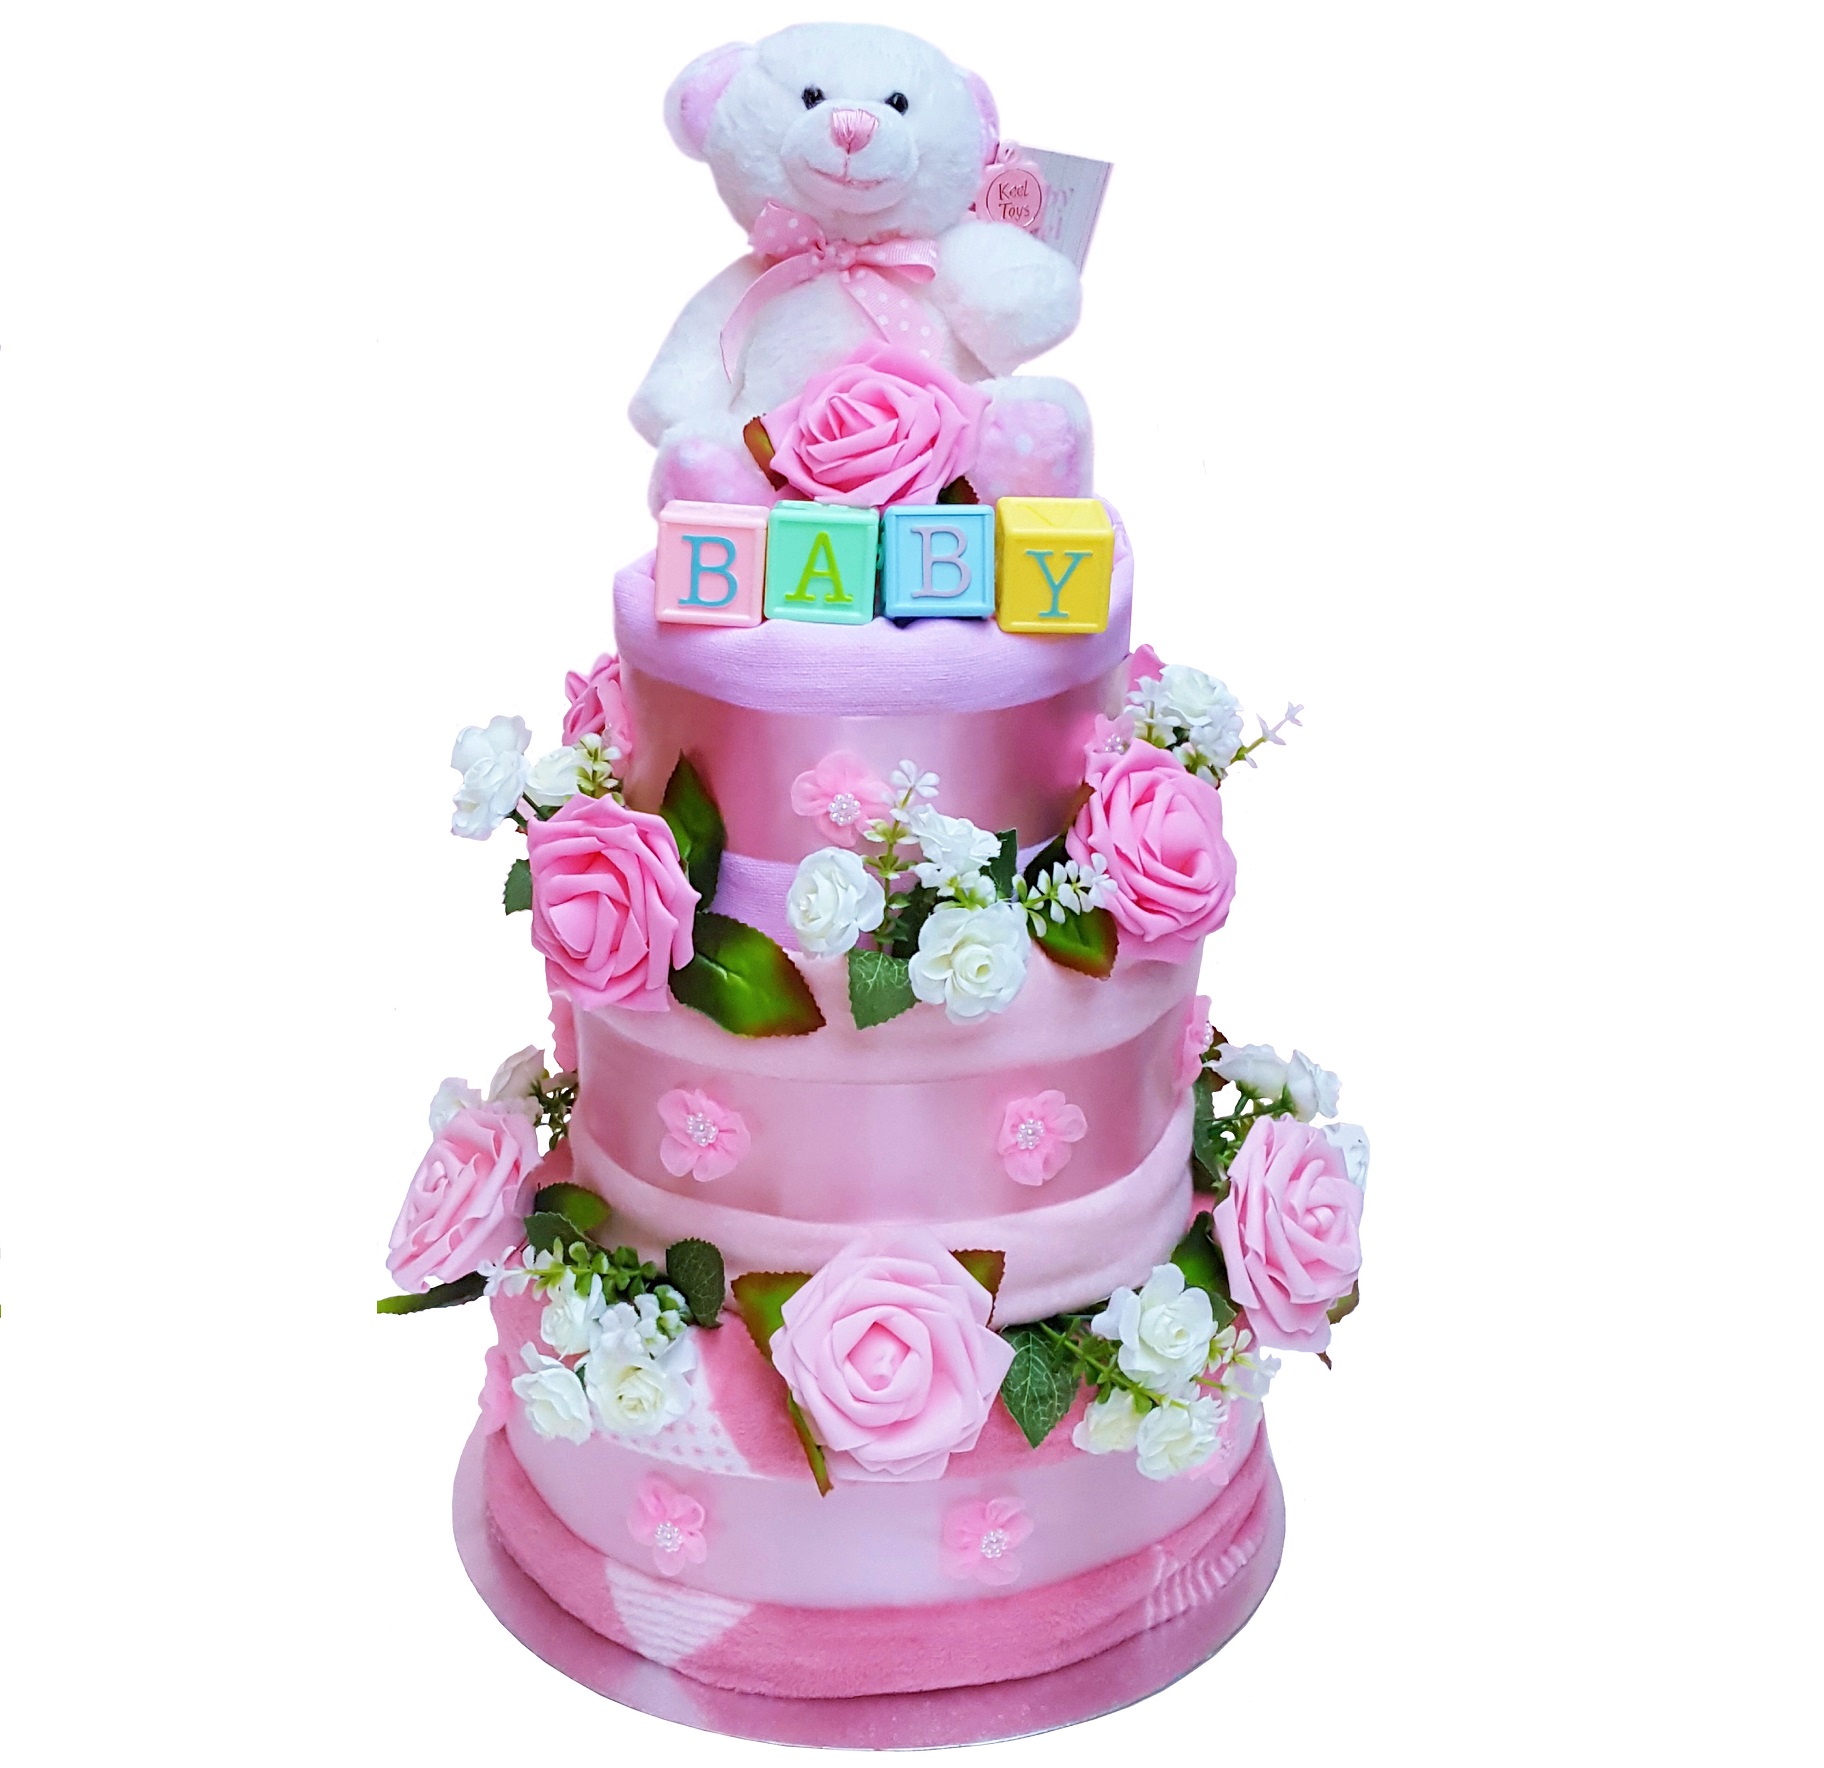 Beautiful Pink Nappy Cake for a Girl